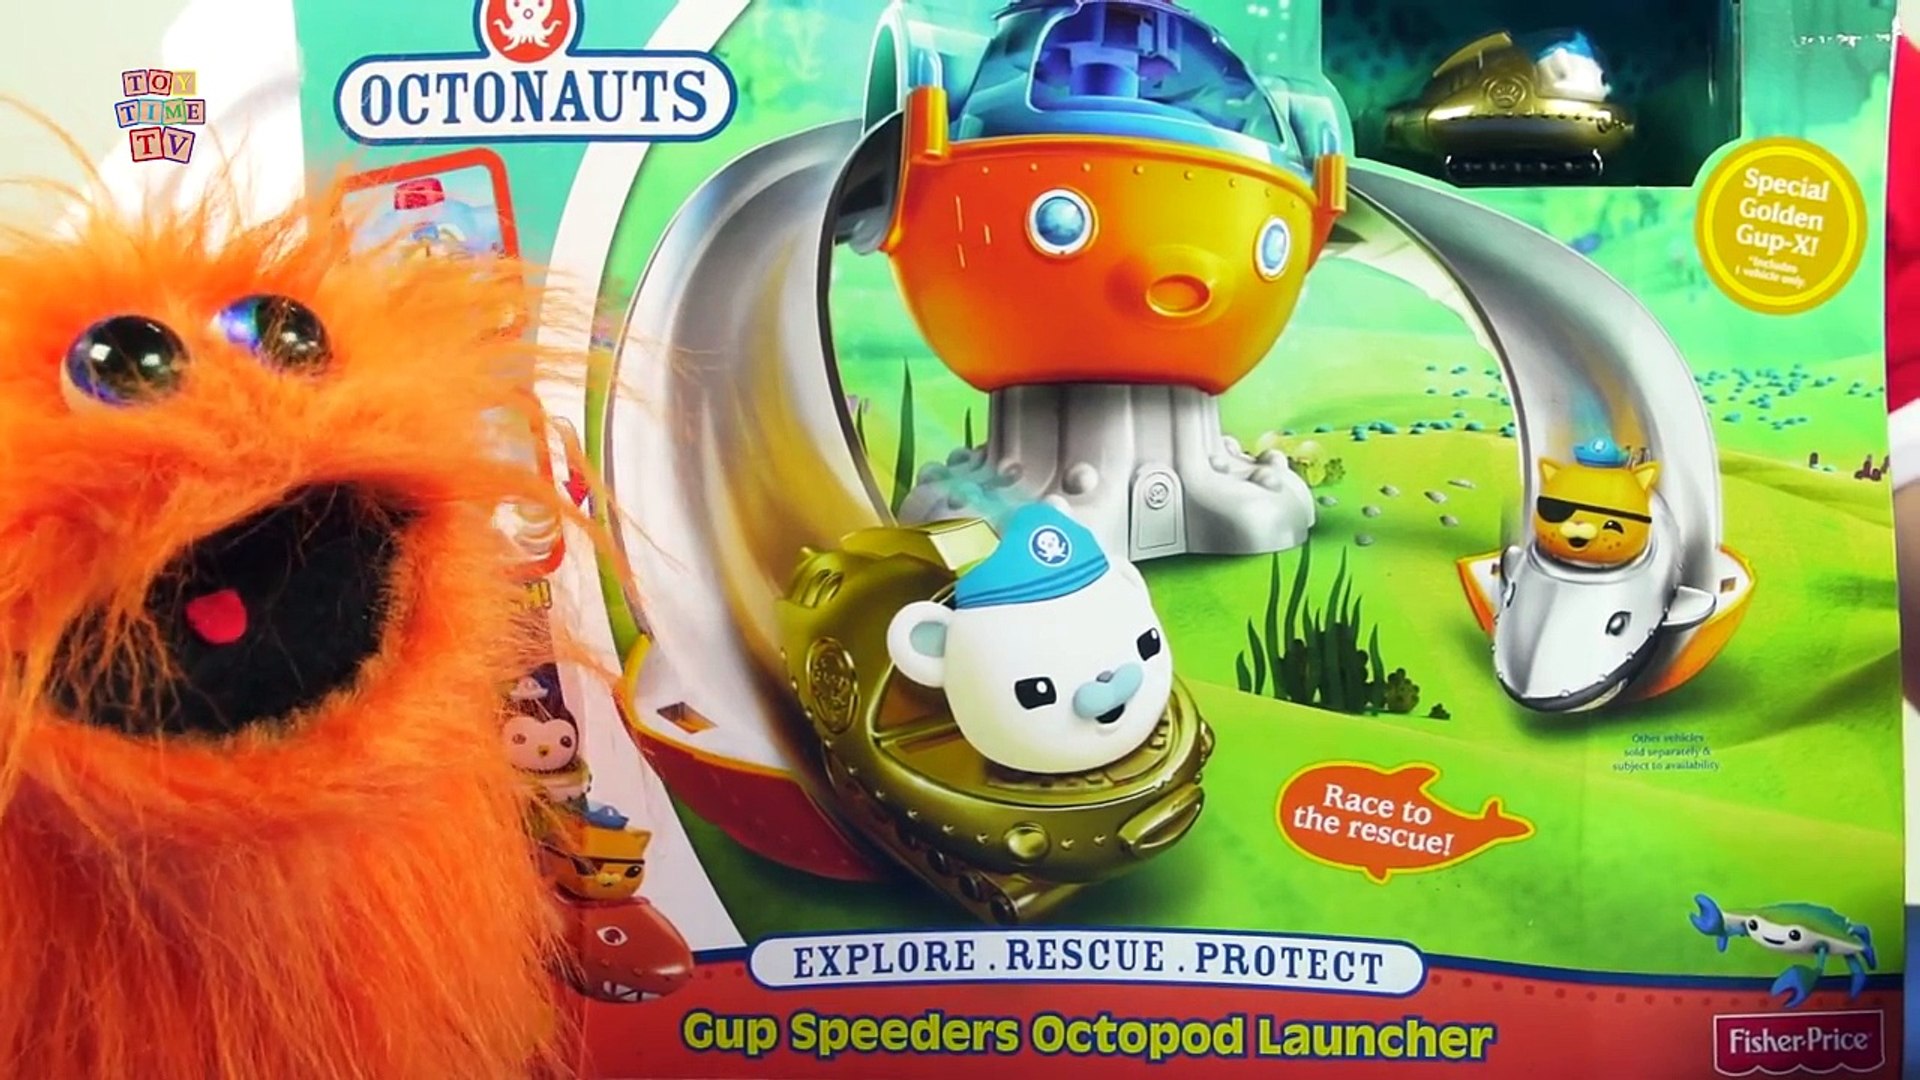 The Octonauts Gup Speeders Octopod Launcher Toy Playset [Fisher Price] -  video Dailymotion